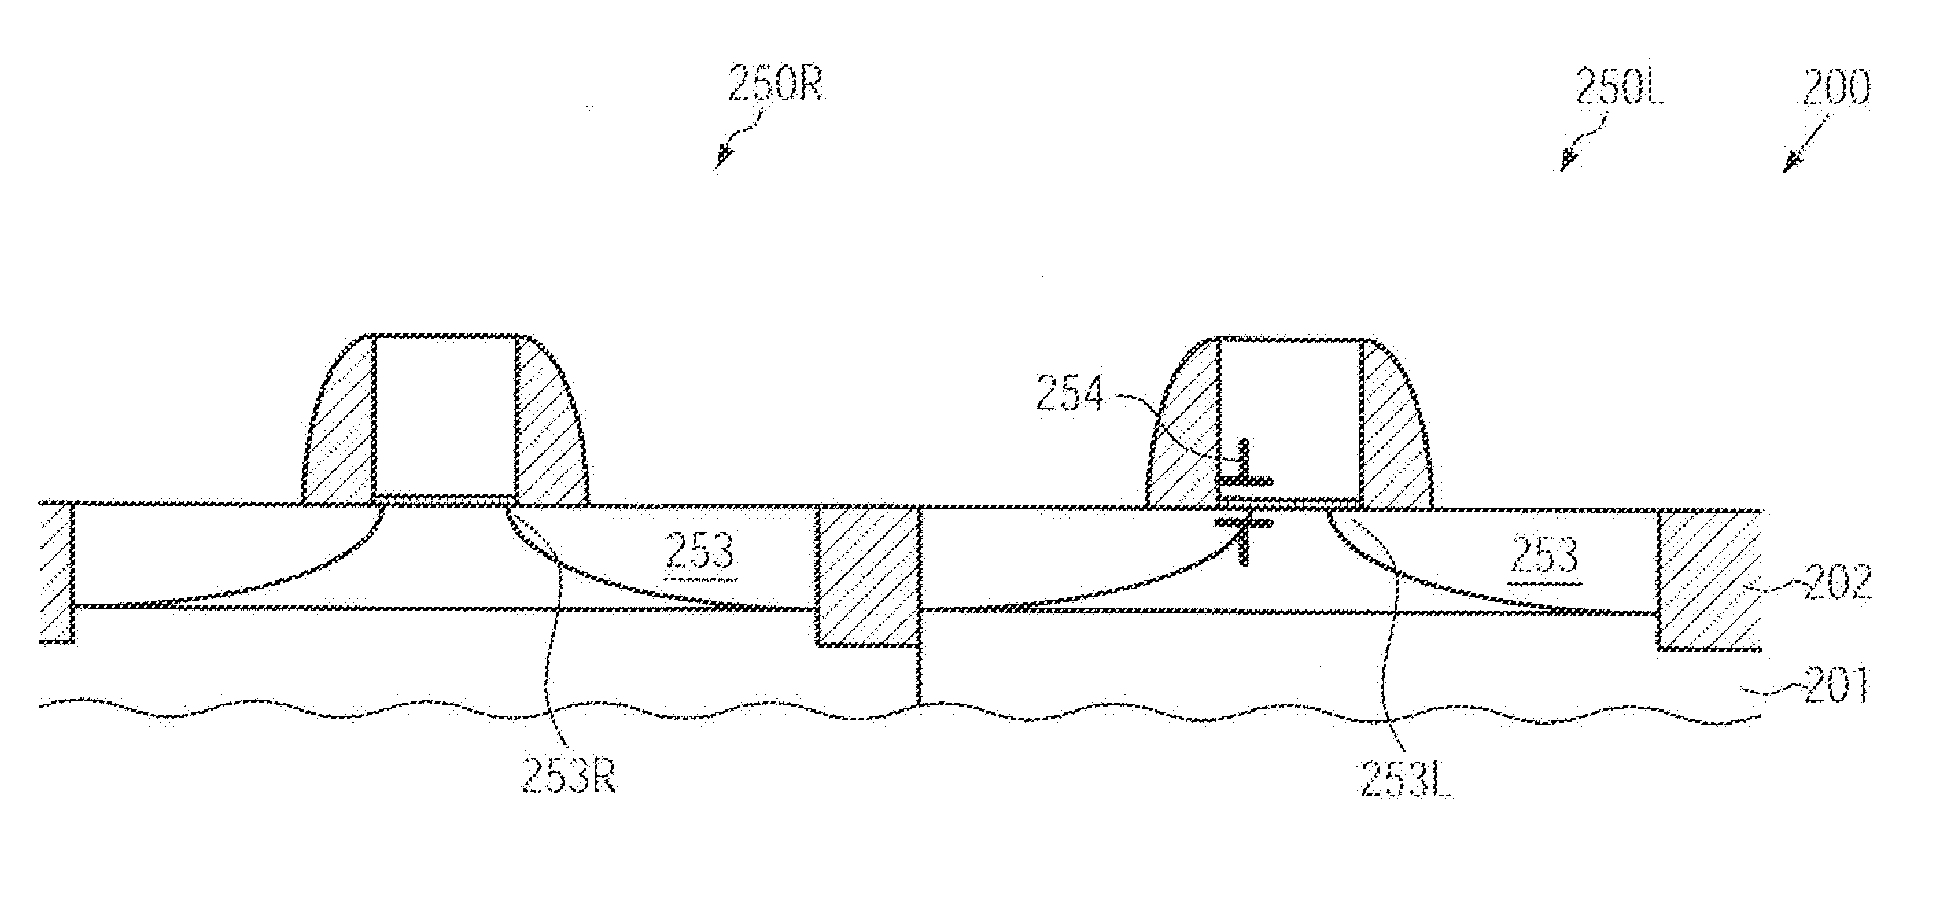 Threshold adjustment for mos devices by adapting a spacer width prior to implantation